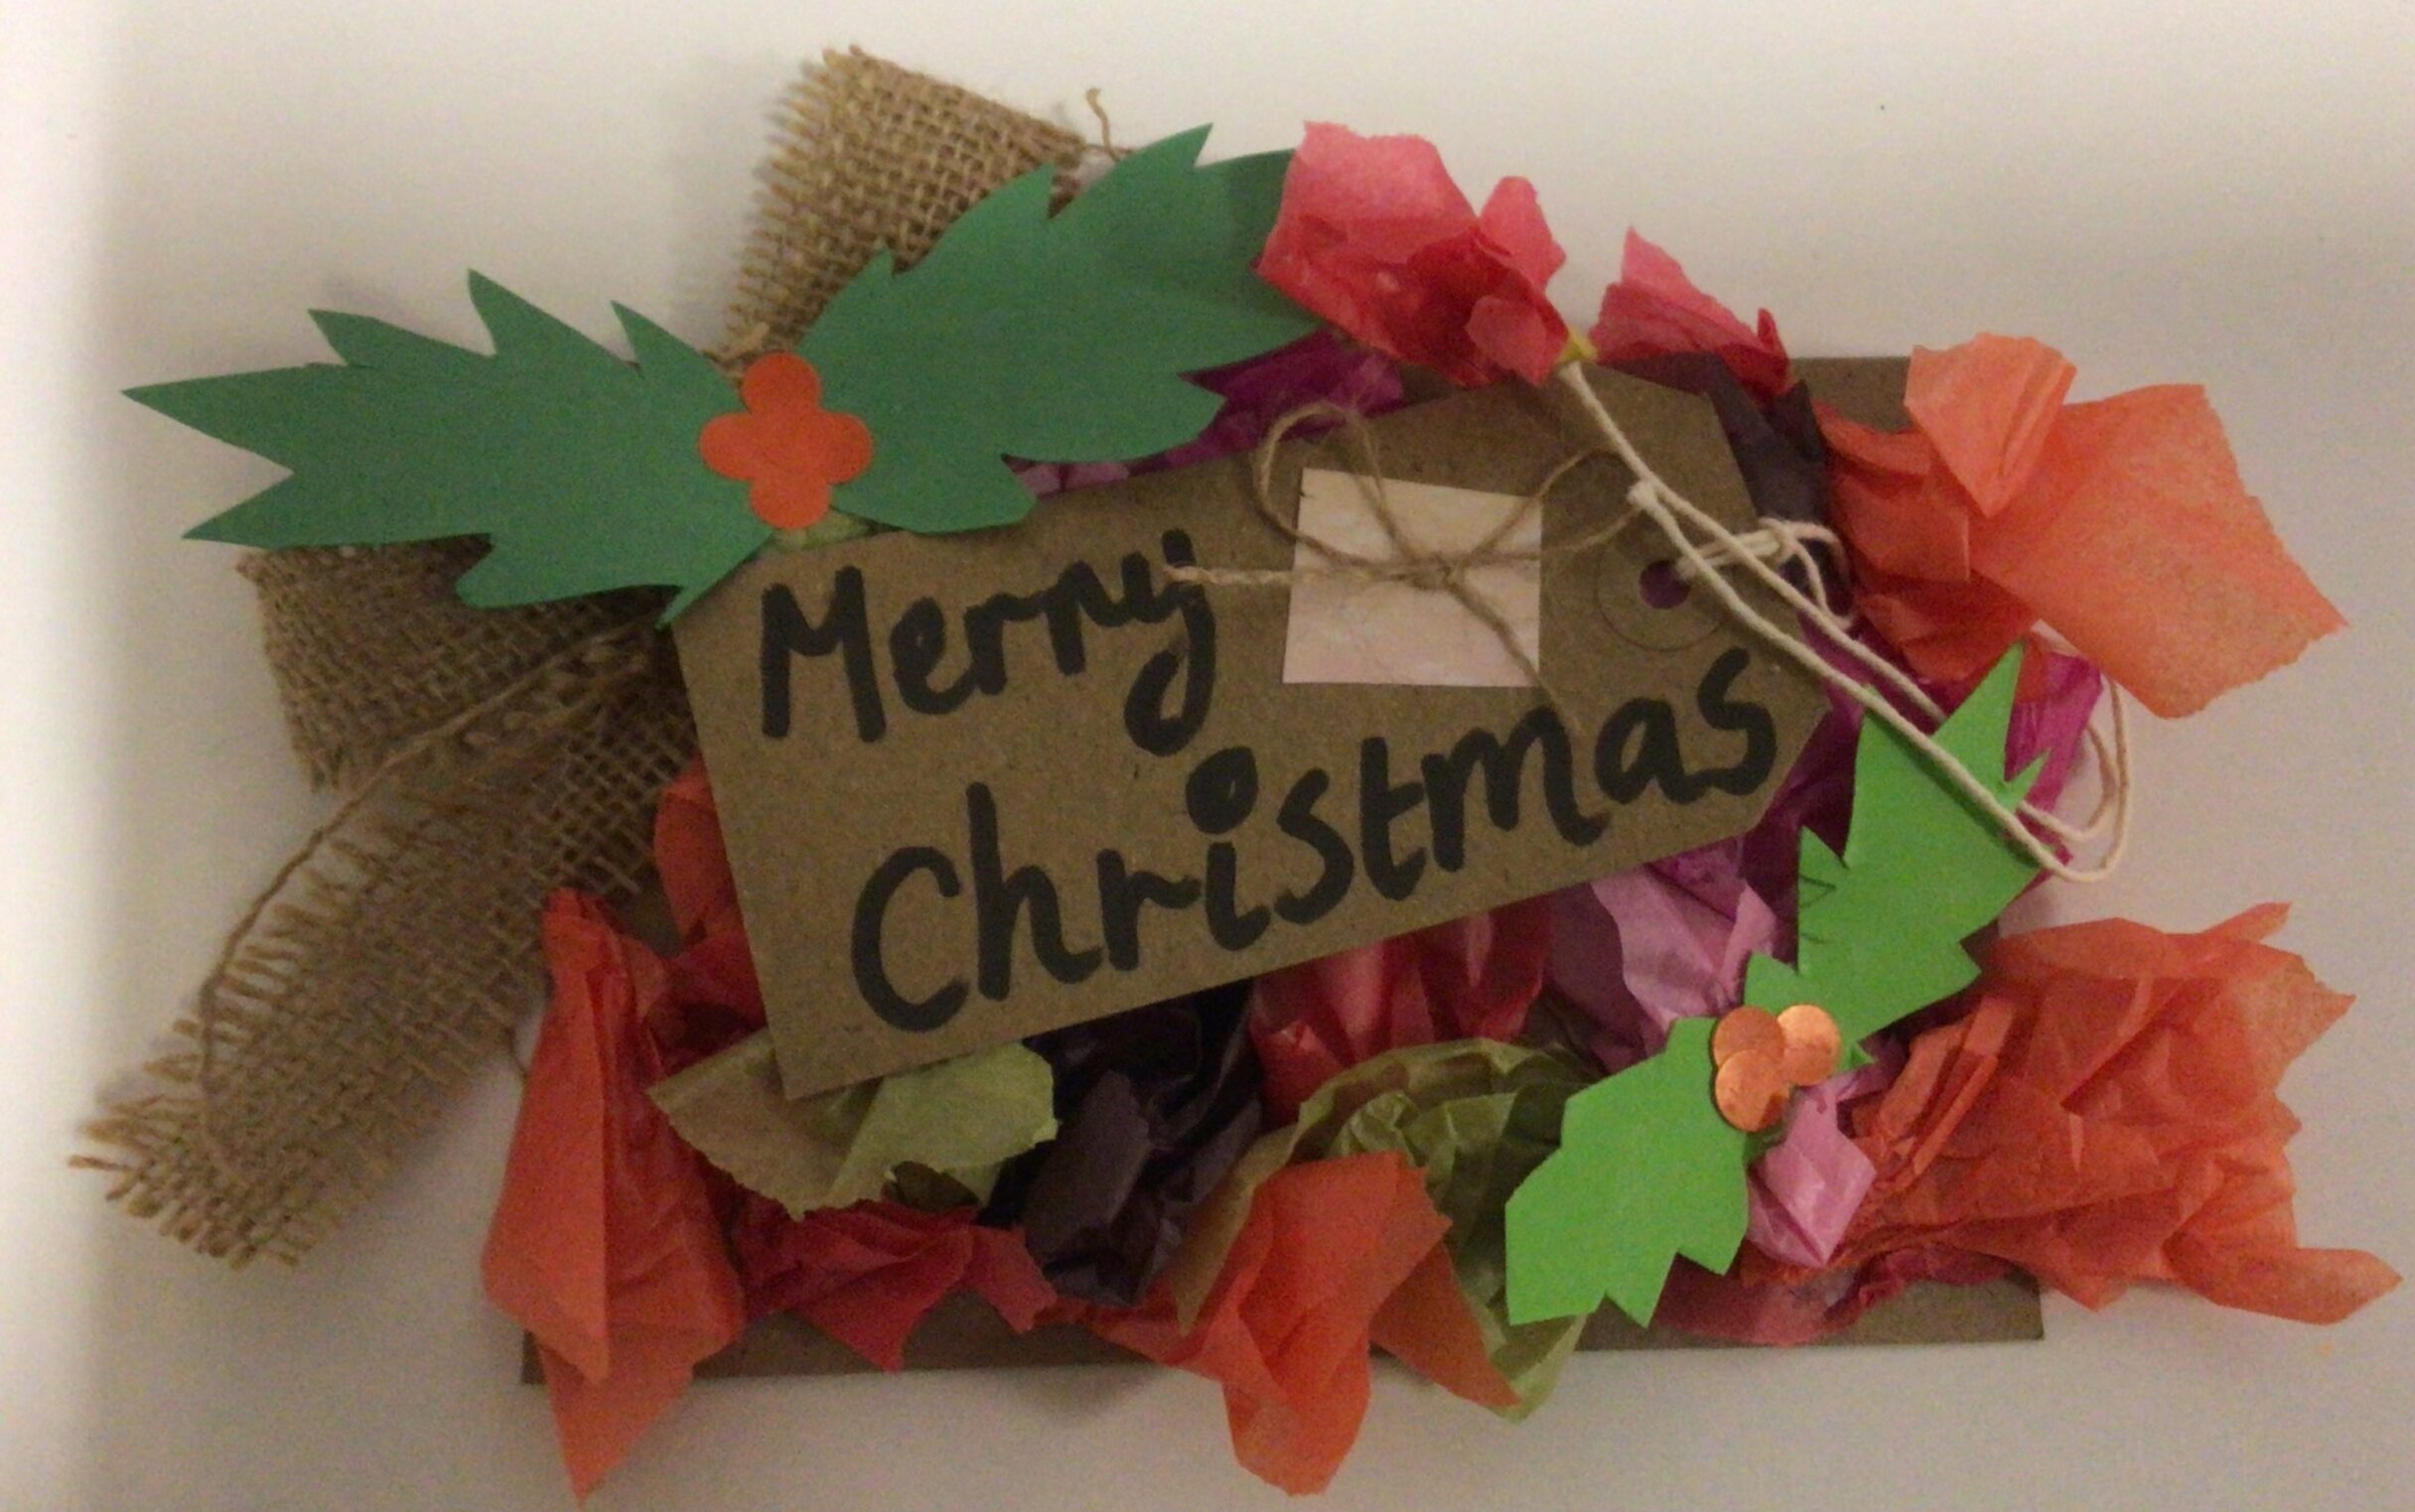 A postcard decorated to look like a Christmas wreath with paper holly leaves and tissue paper